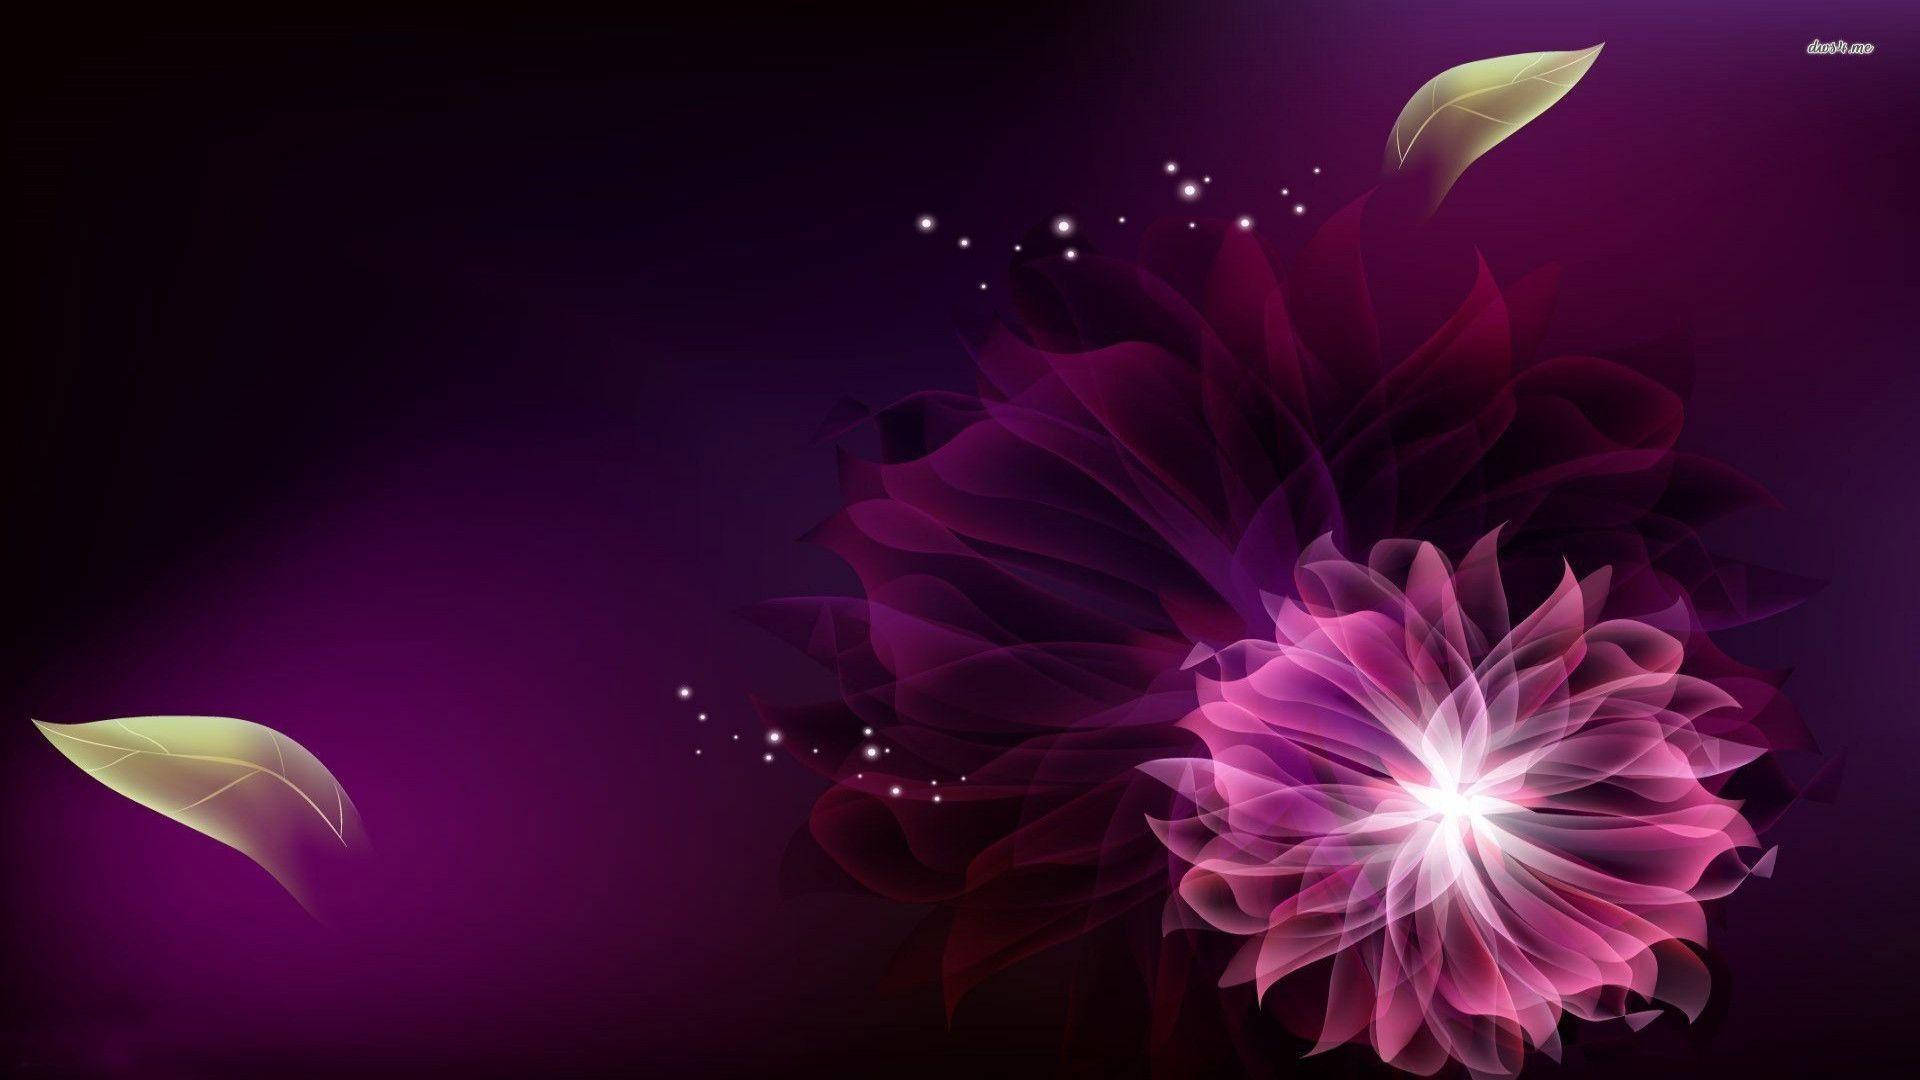 A beautiful purple flower blooming on a laptop computer. Wallpaper